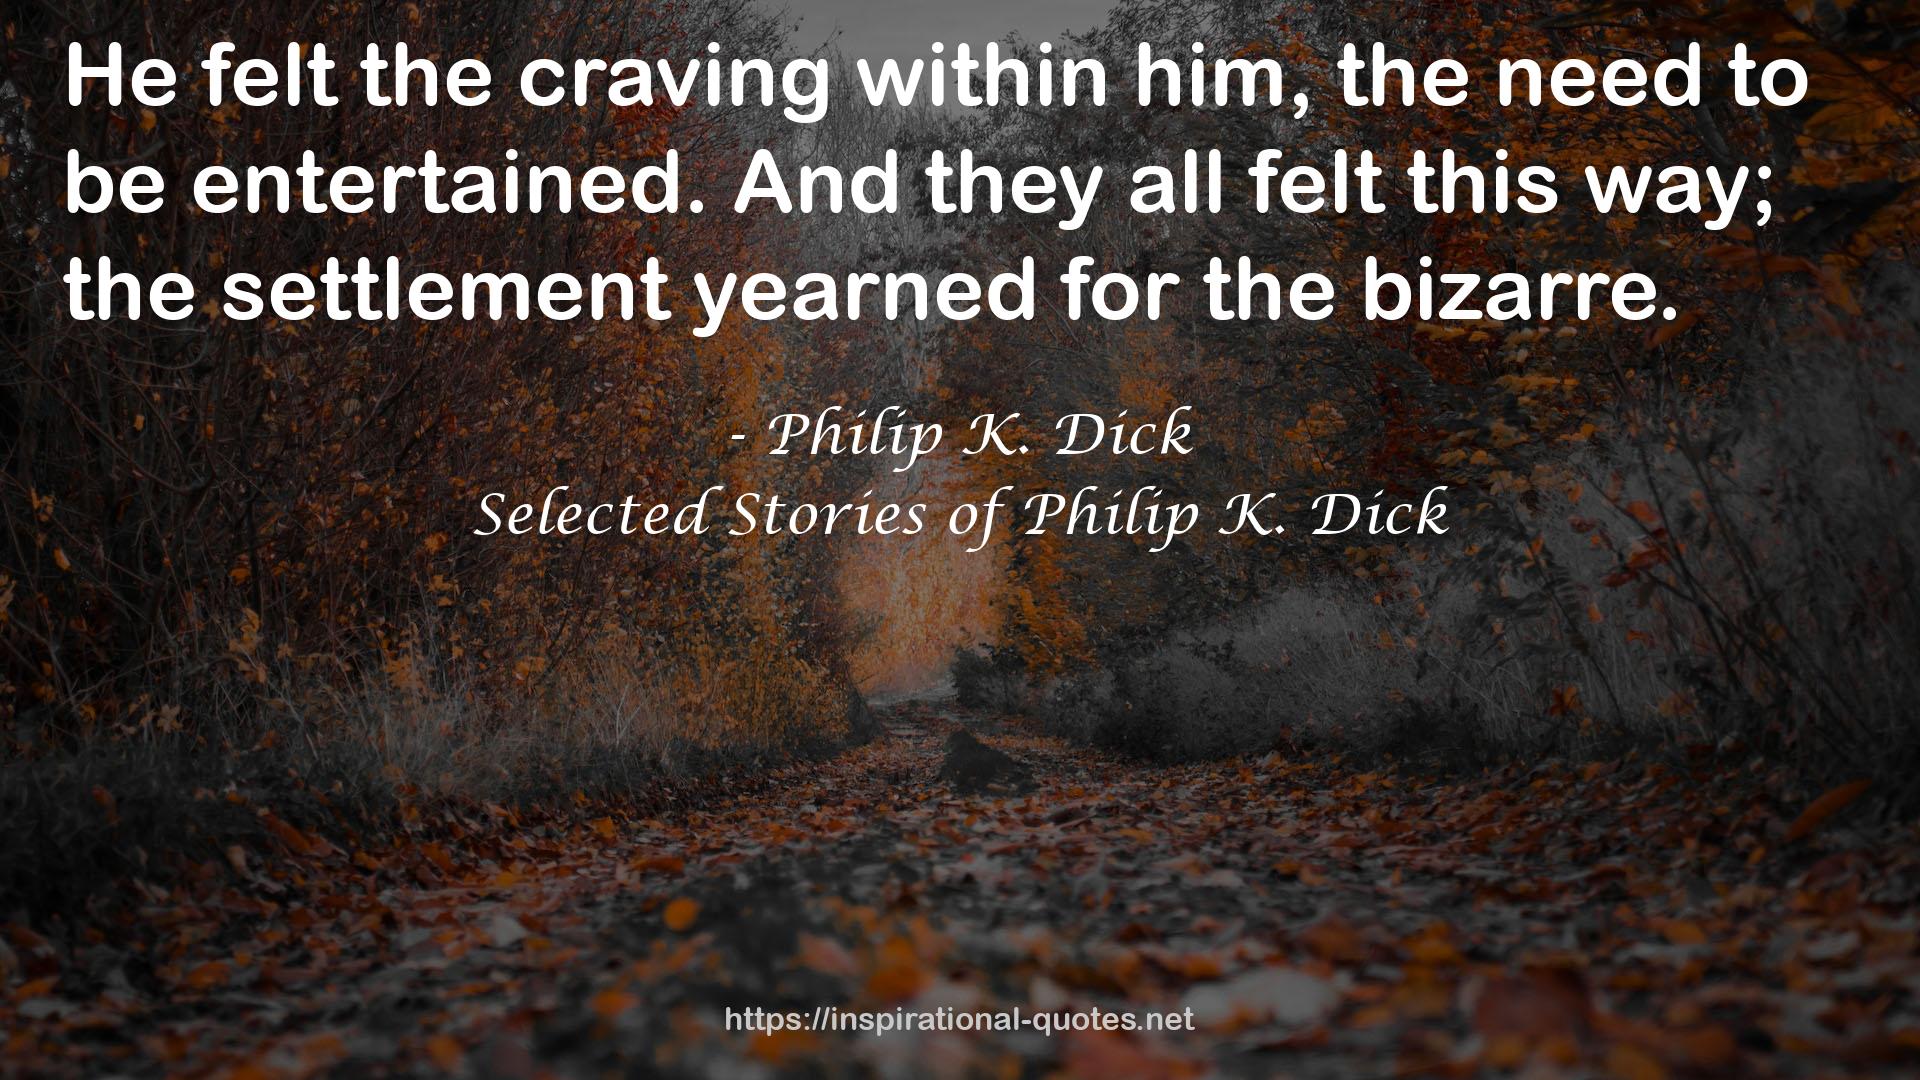 Selected Stories of Philip K. Dick QUOTES